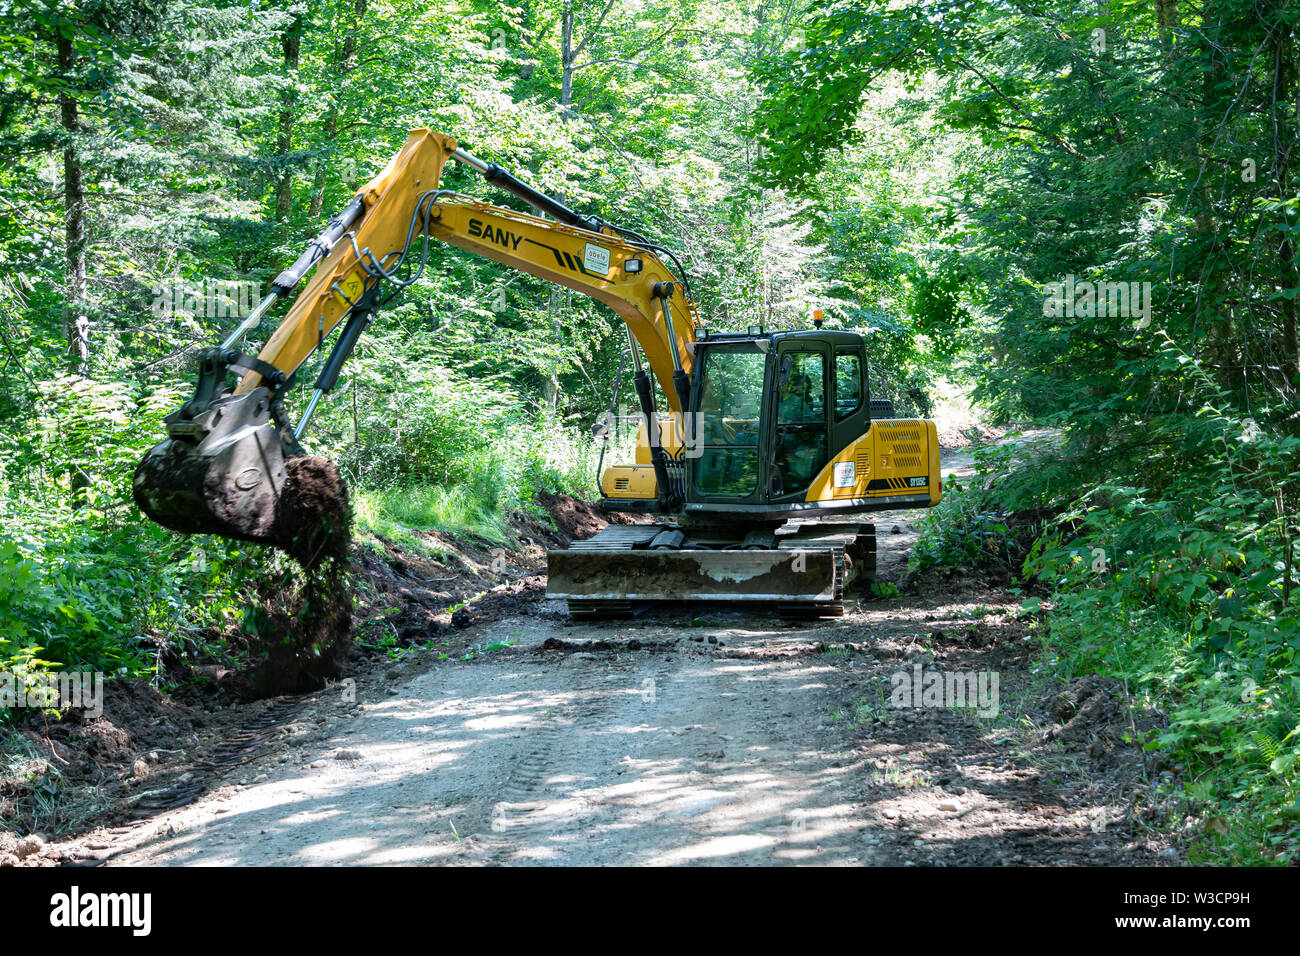 A SANY track hoe excavator clearing the ditches on an Adirondack Mountains, NY USA, forest logging road. Stock Photo